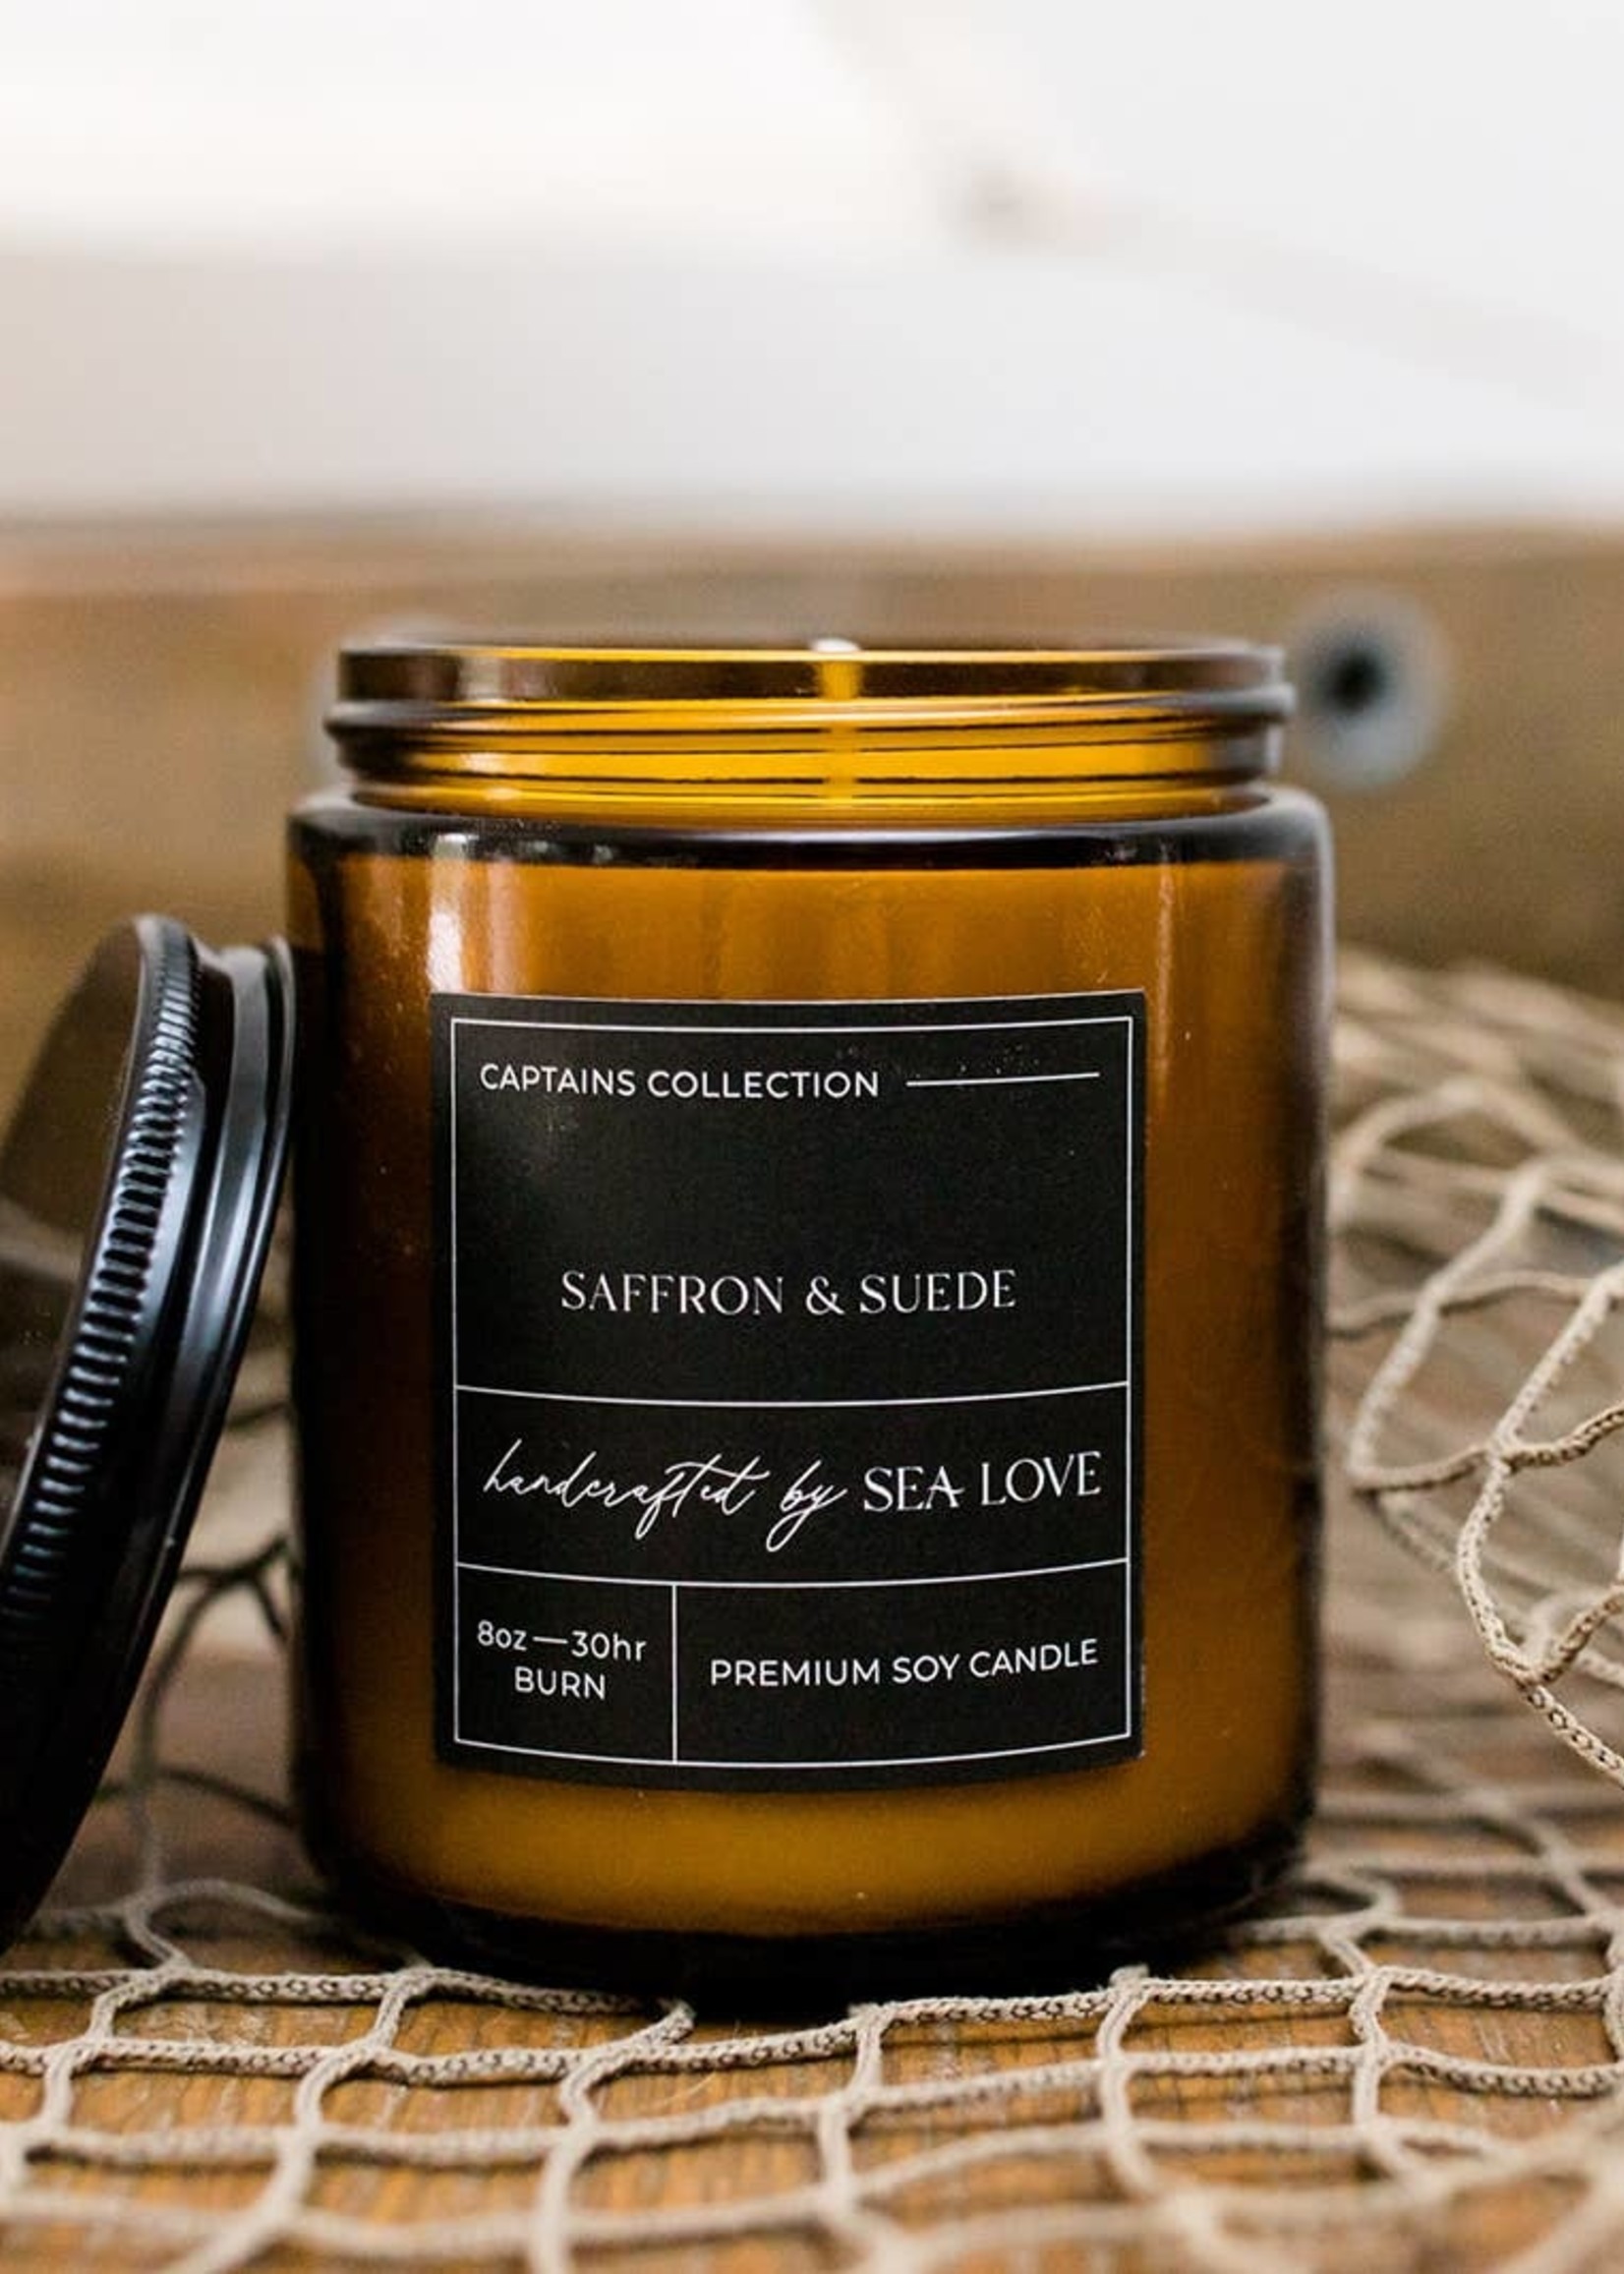 Sea Love Candles & Company Captains Collection